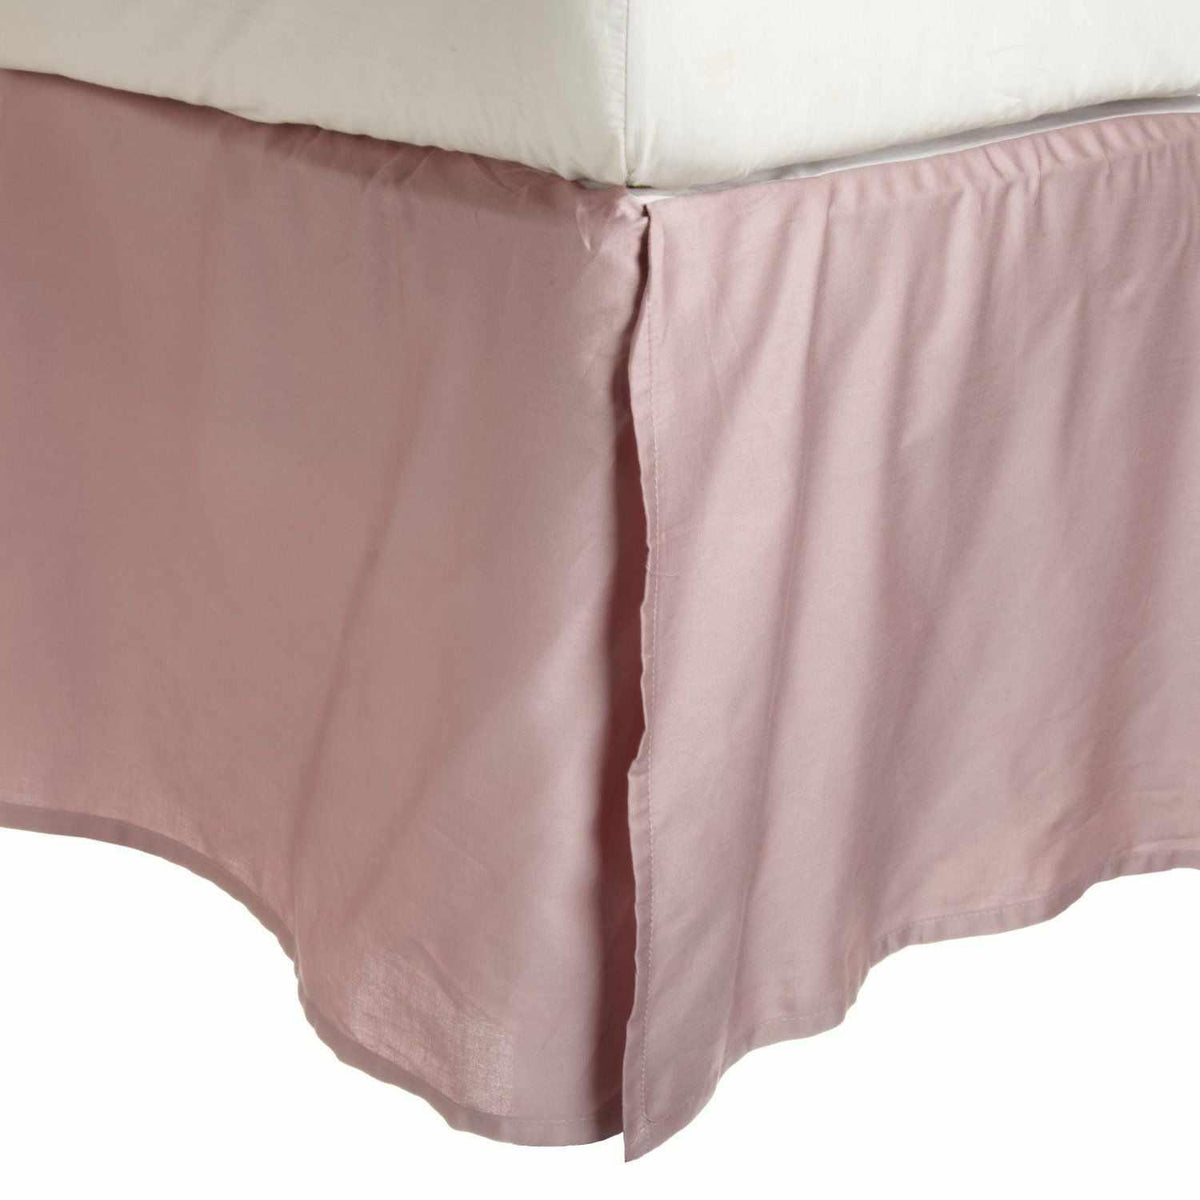 Superior Cotton 15 Inch Drop Solid Bed Skirt - Pink 